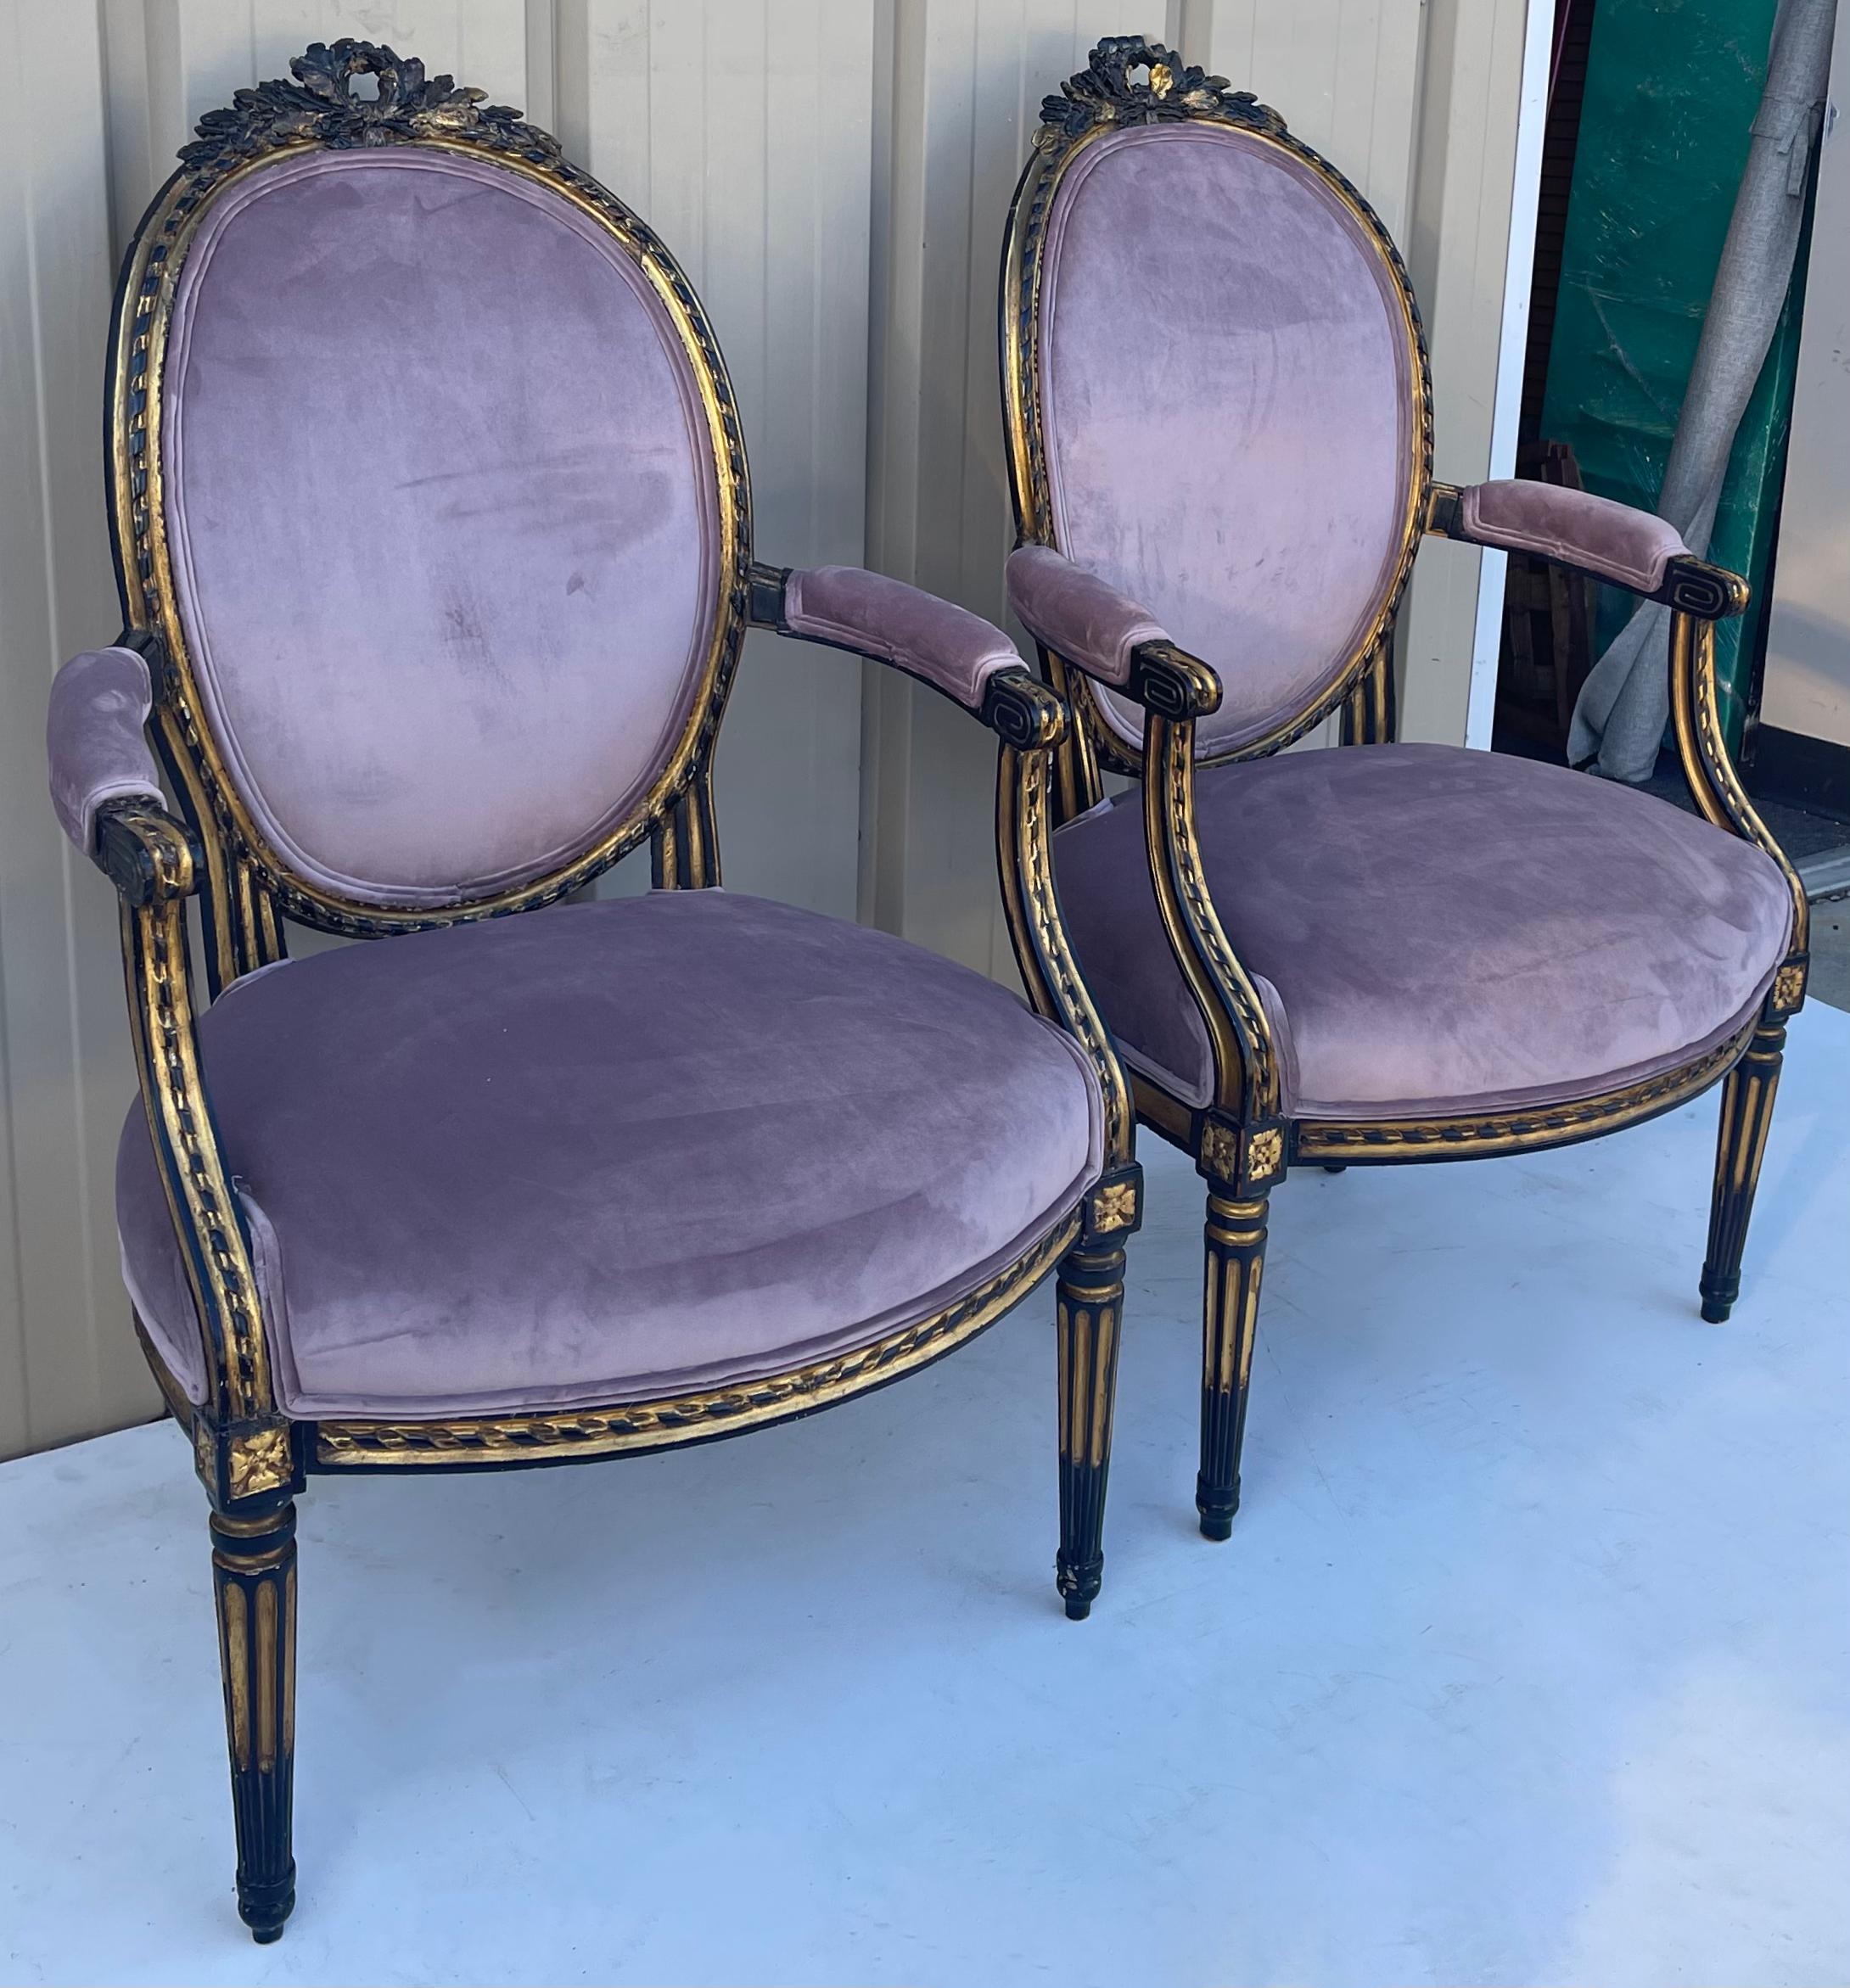 Late 19th Century French Louis XIV Style Ebonized and Parcel-Gilt Bergère Chairs, a Pair For Sale